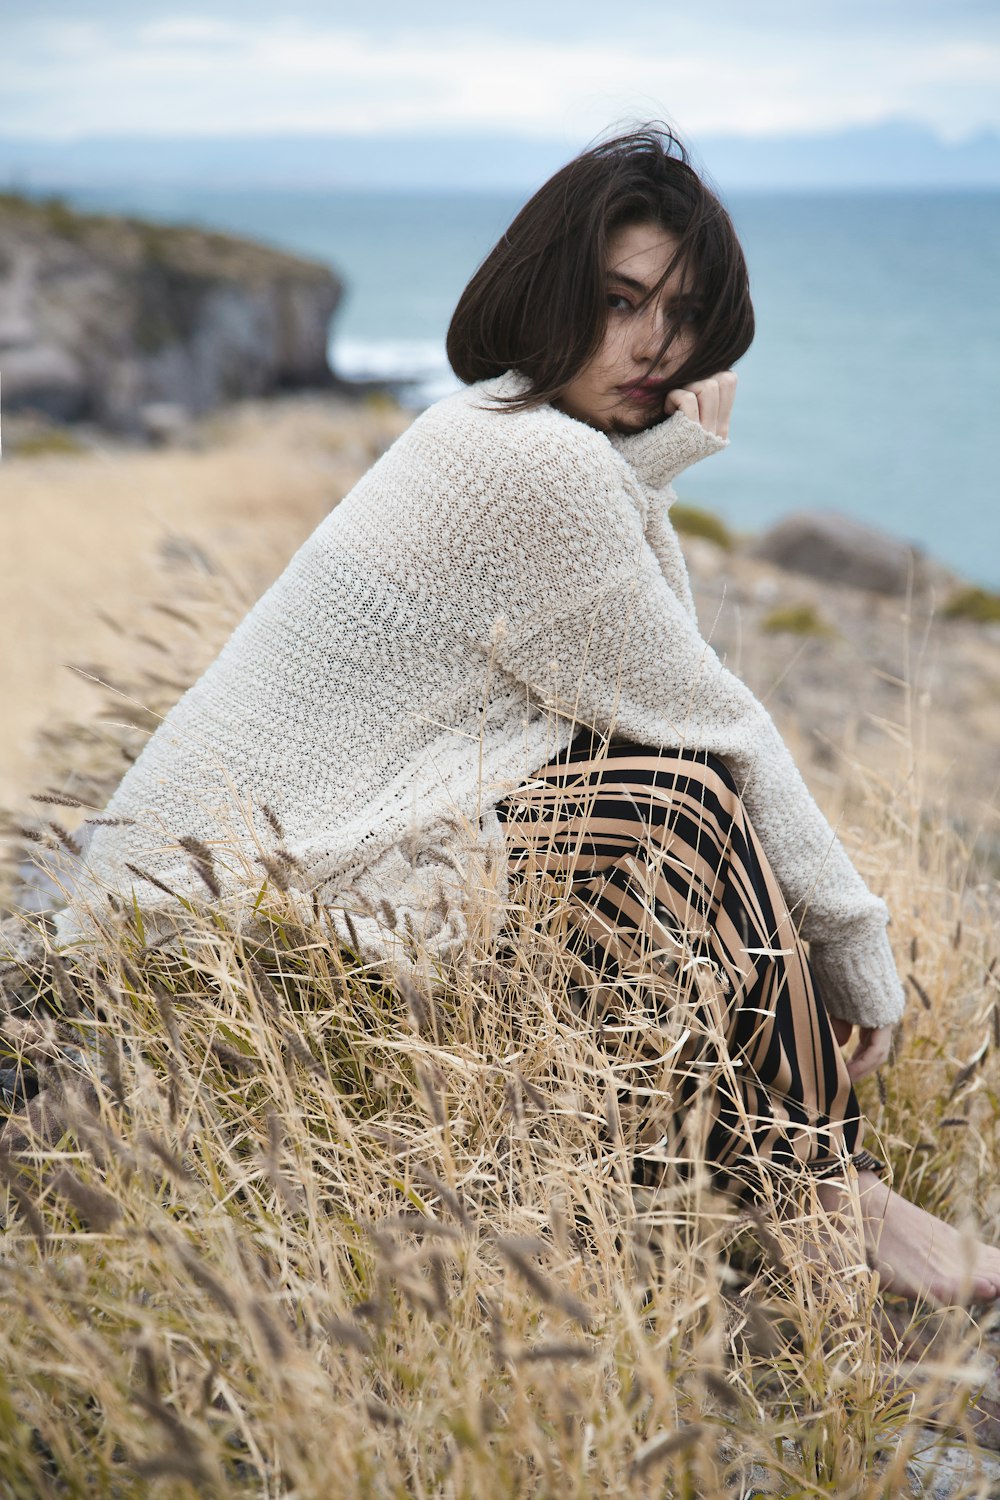 woman in white knit sweater sitting on brown grass field during daytime